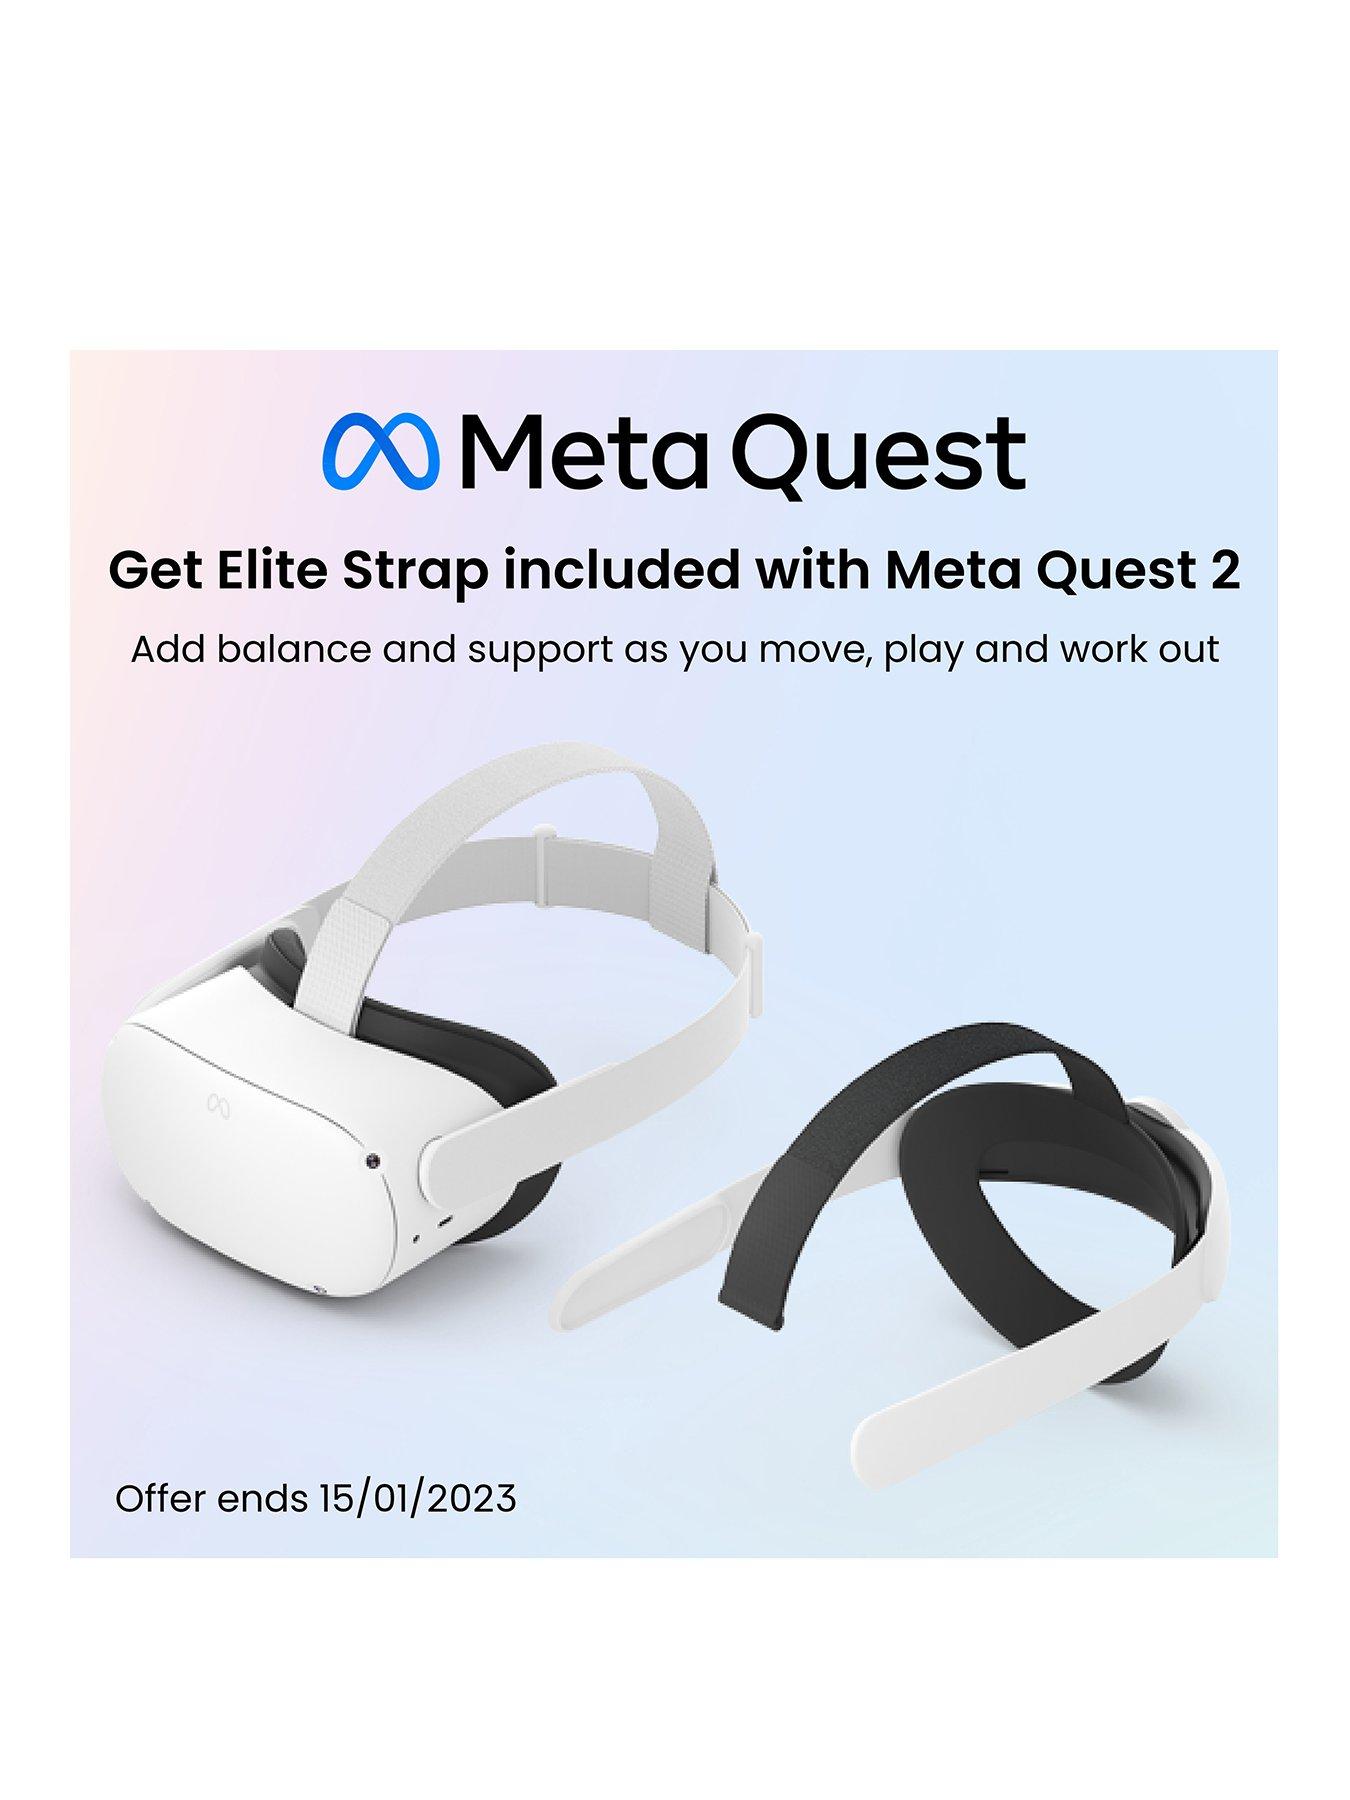 2 128GB, All-in-One VR Headset + Free Elite Strap